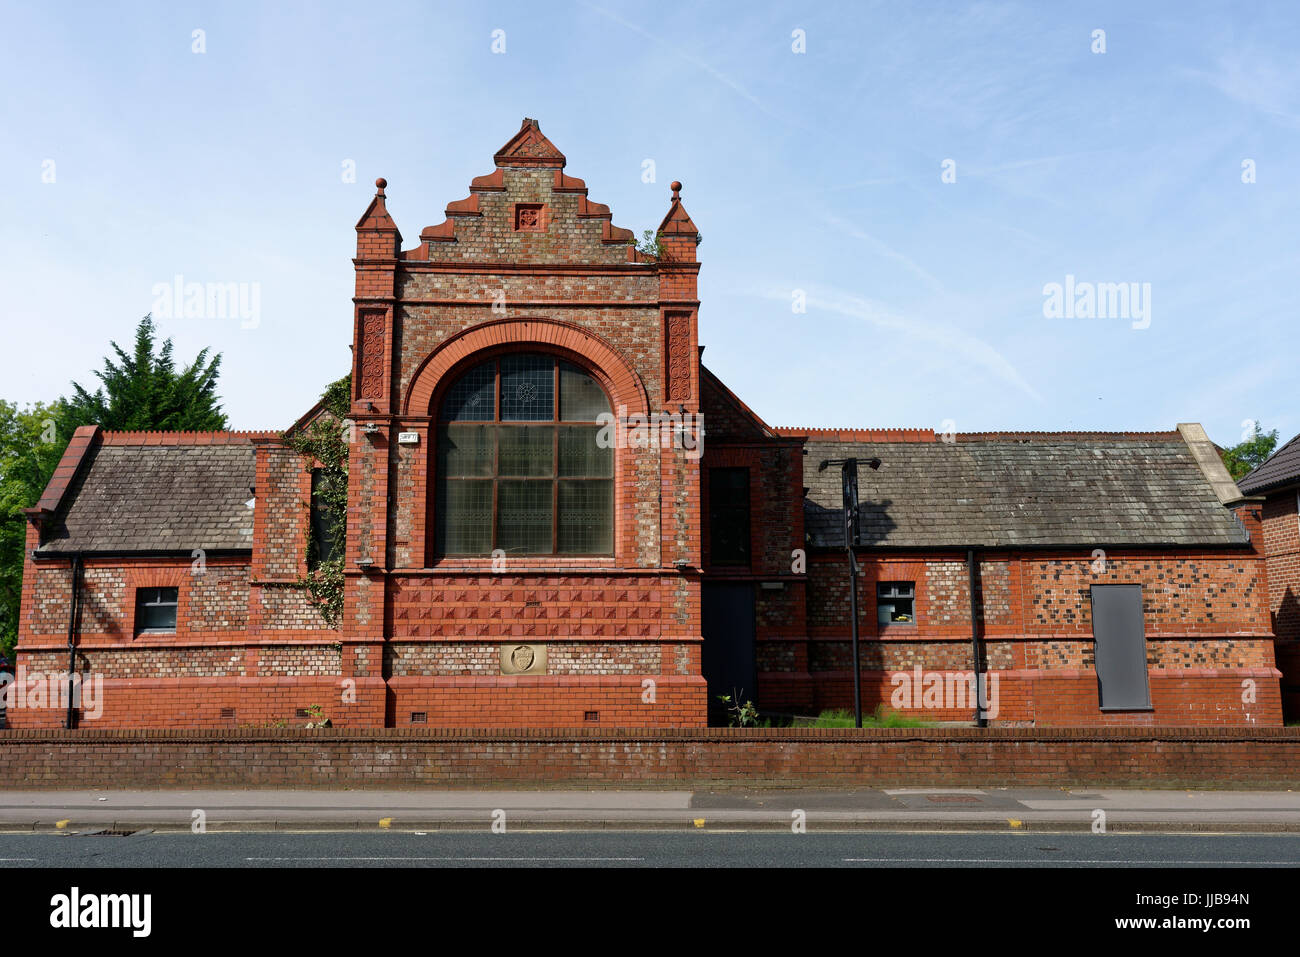 Church converted into indian restaurant in whitefield near bury lancashire uk Stock Photo